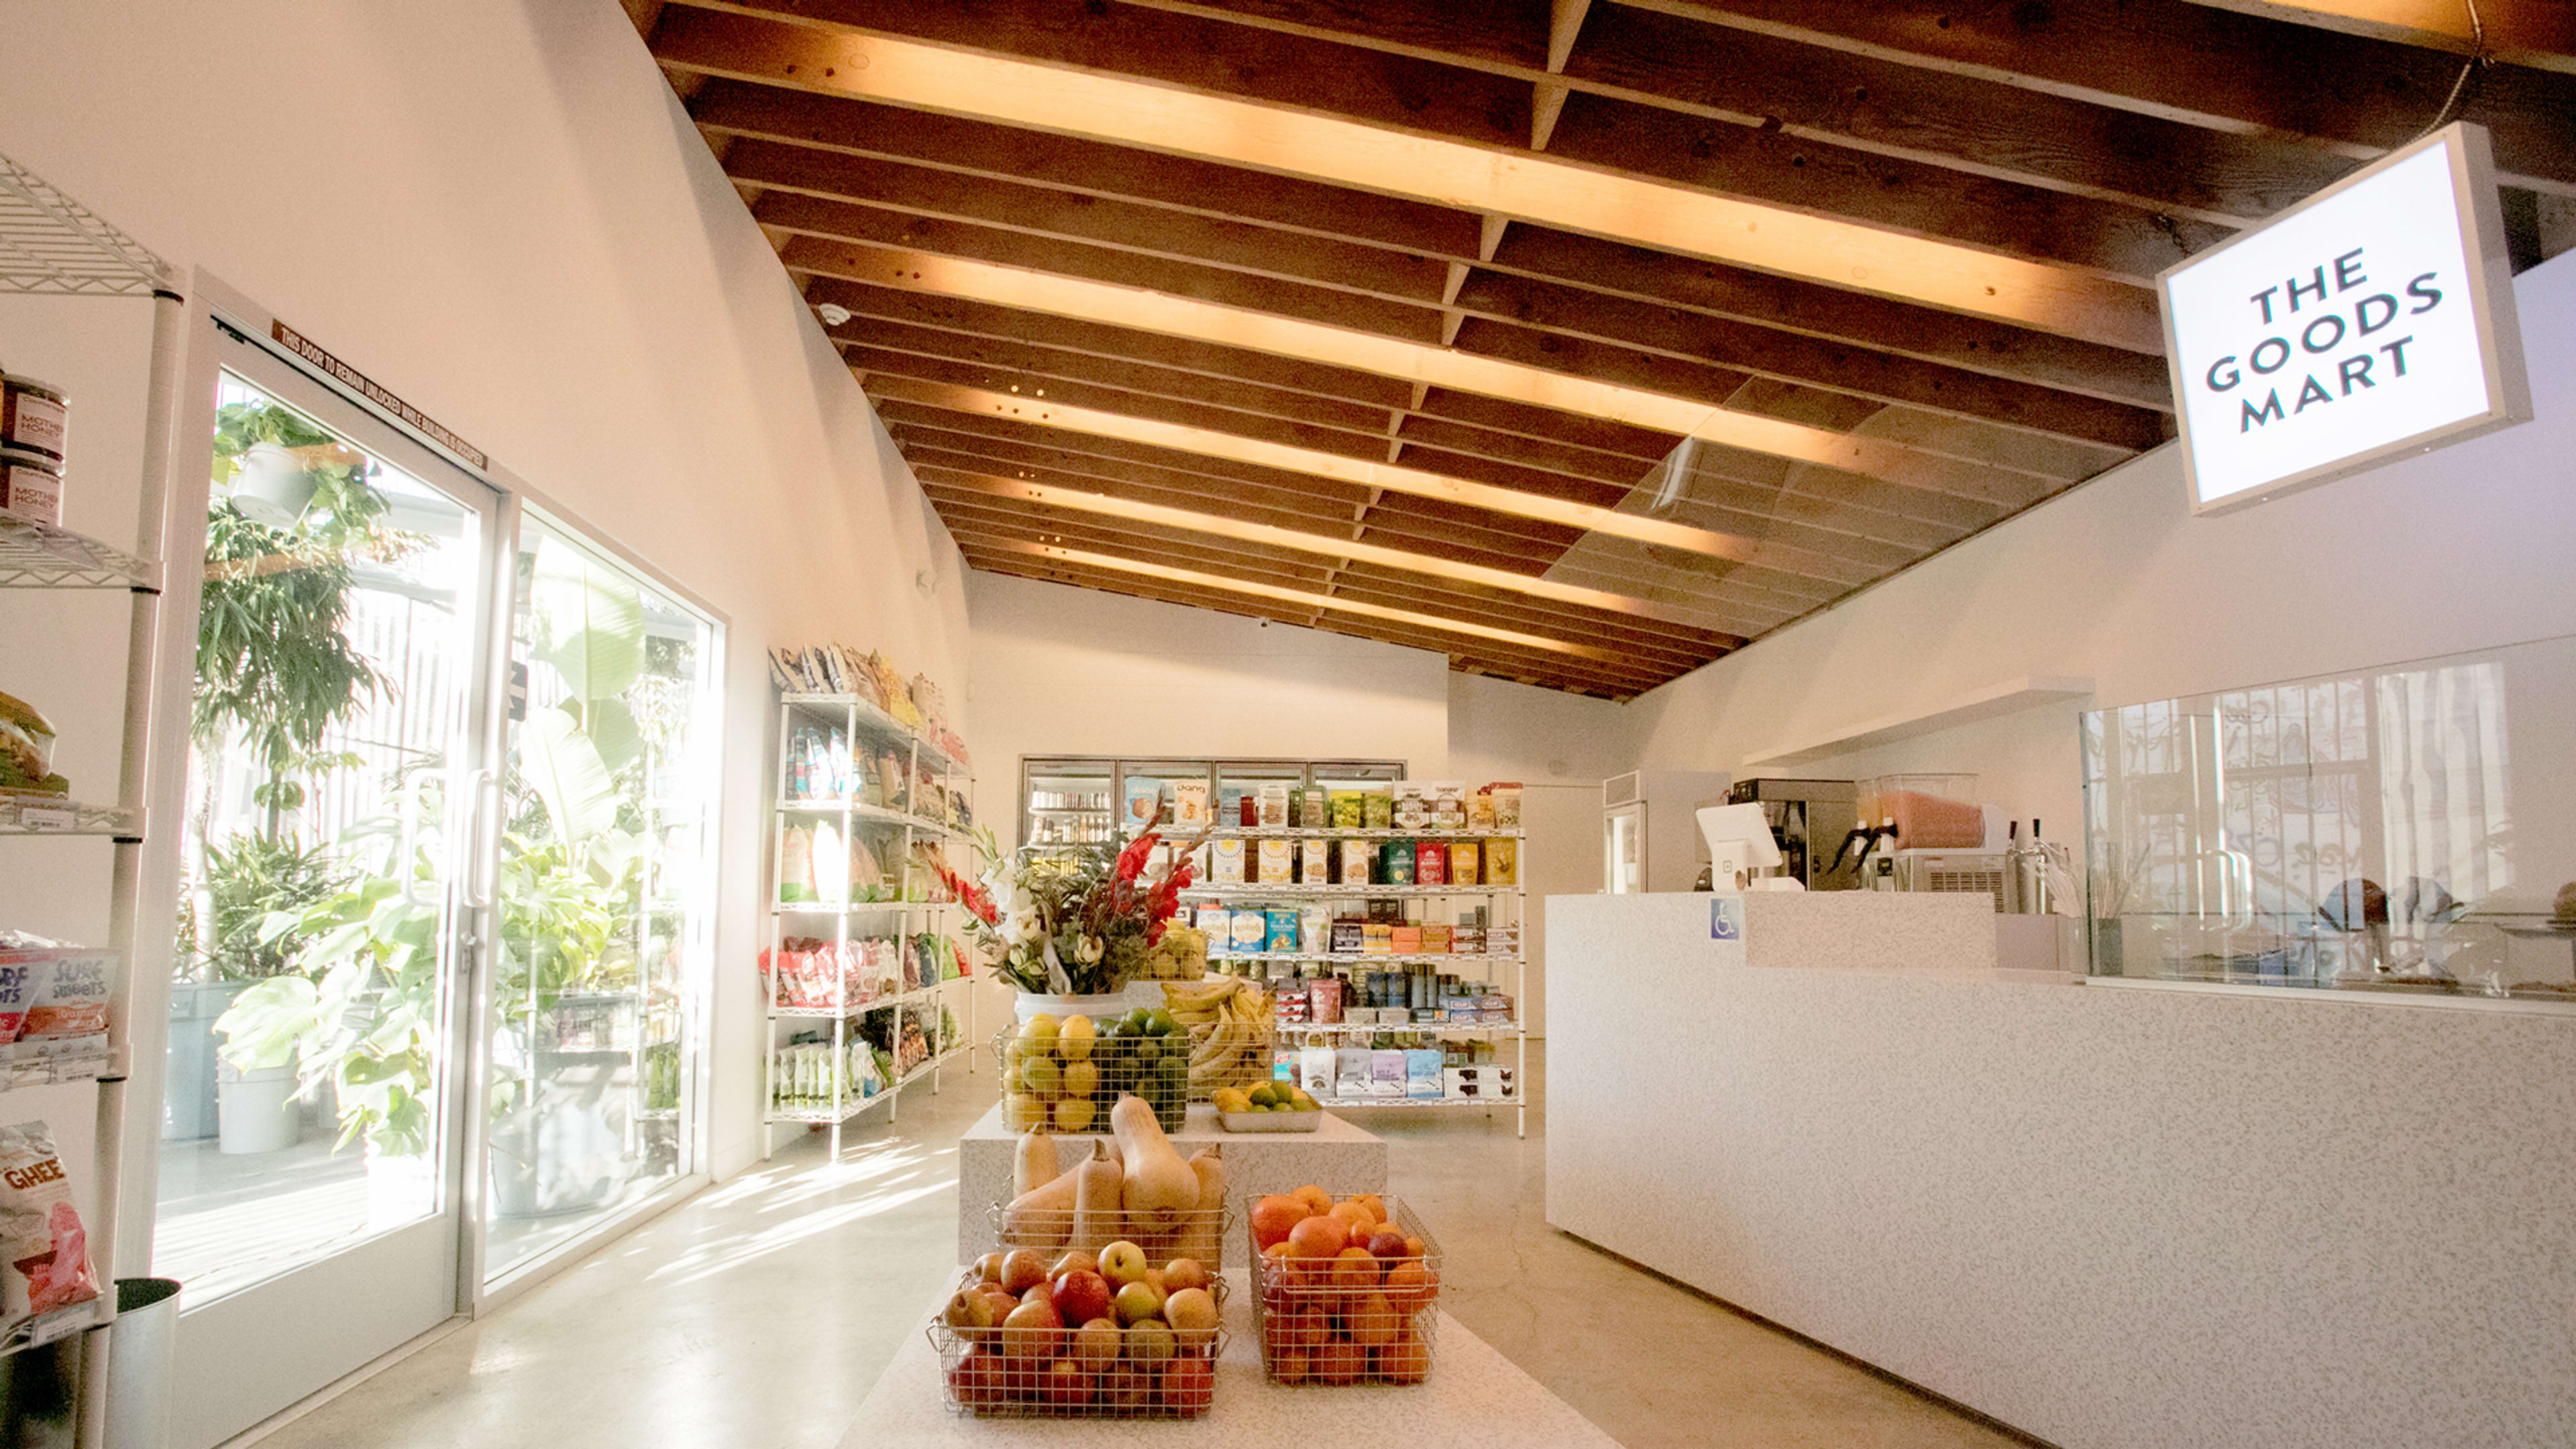 This Healthy Convenience Mart Aims To Take On 7-Eleven